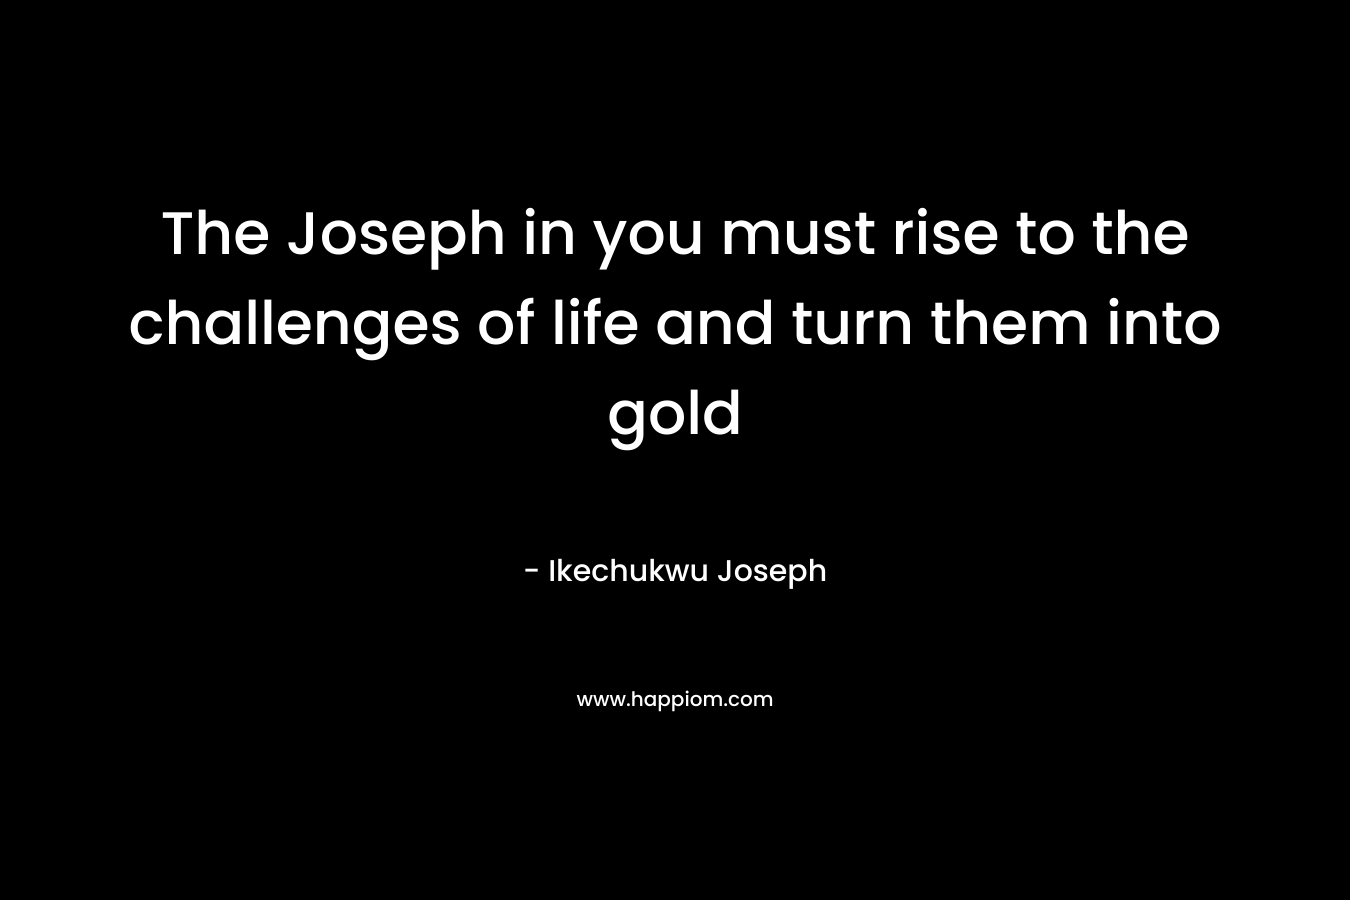 The Joseph in you must rise to the challenges of life and turn them into gold – Ikechukwu Joseph